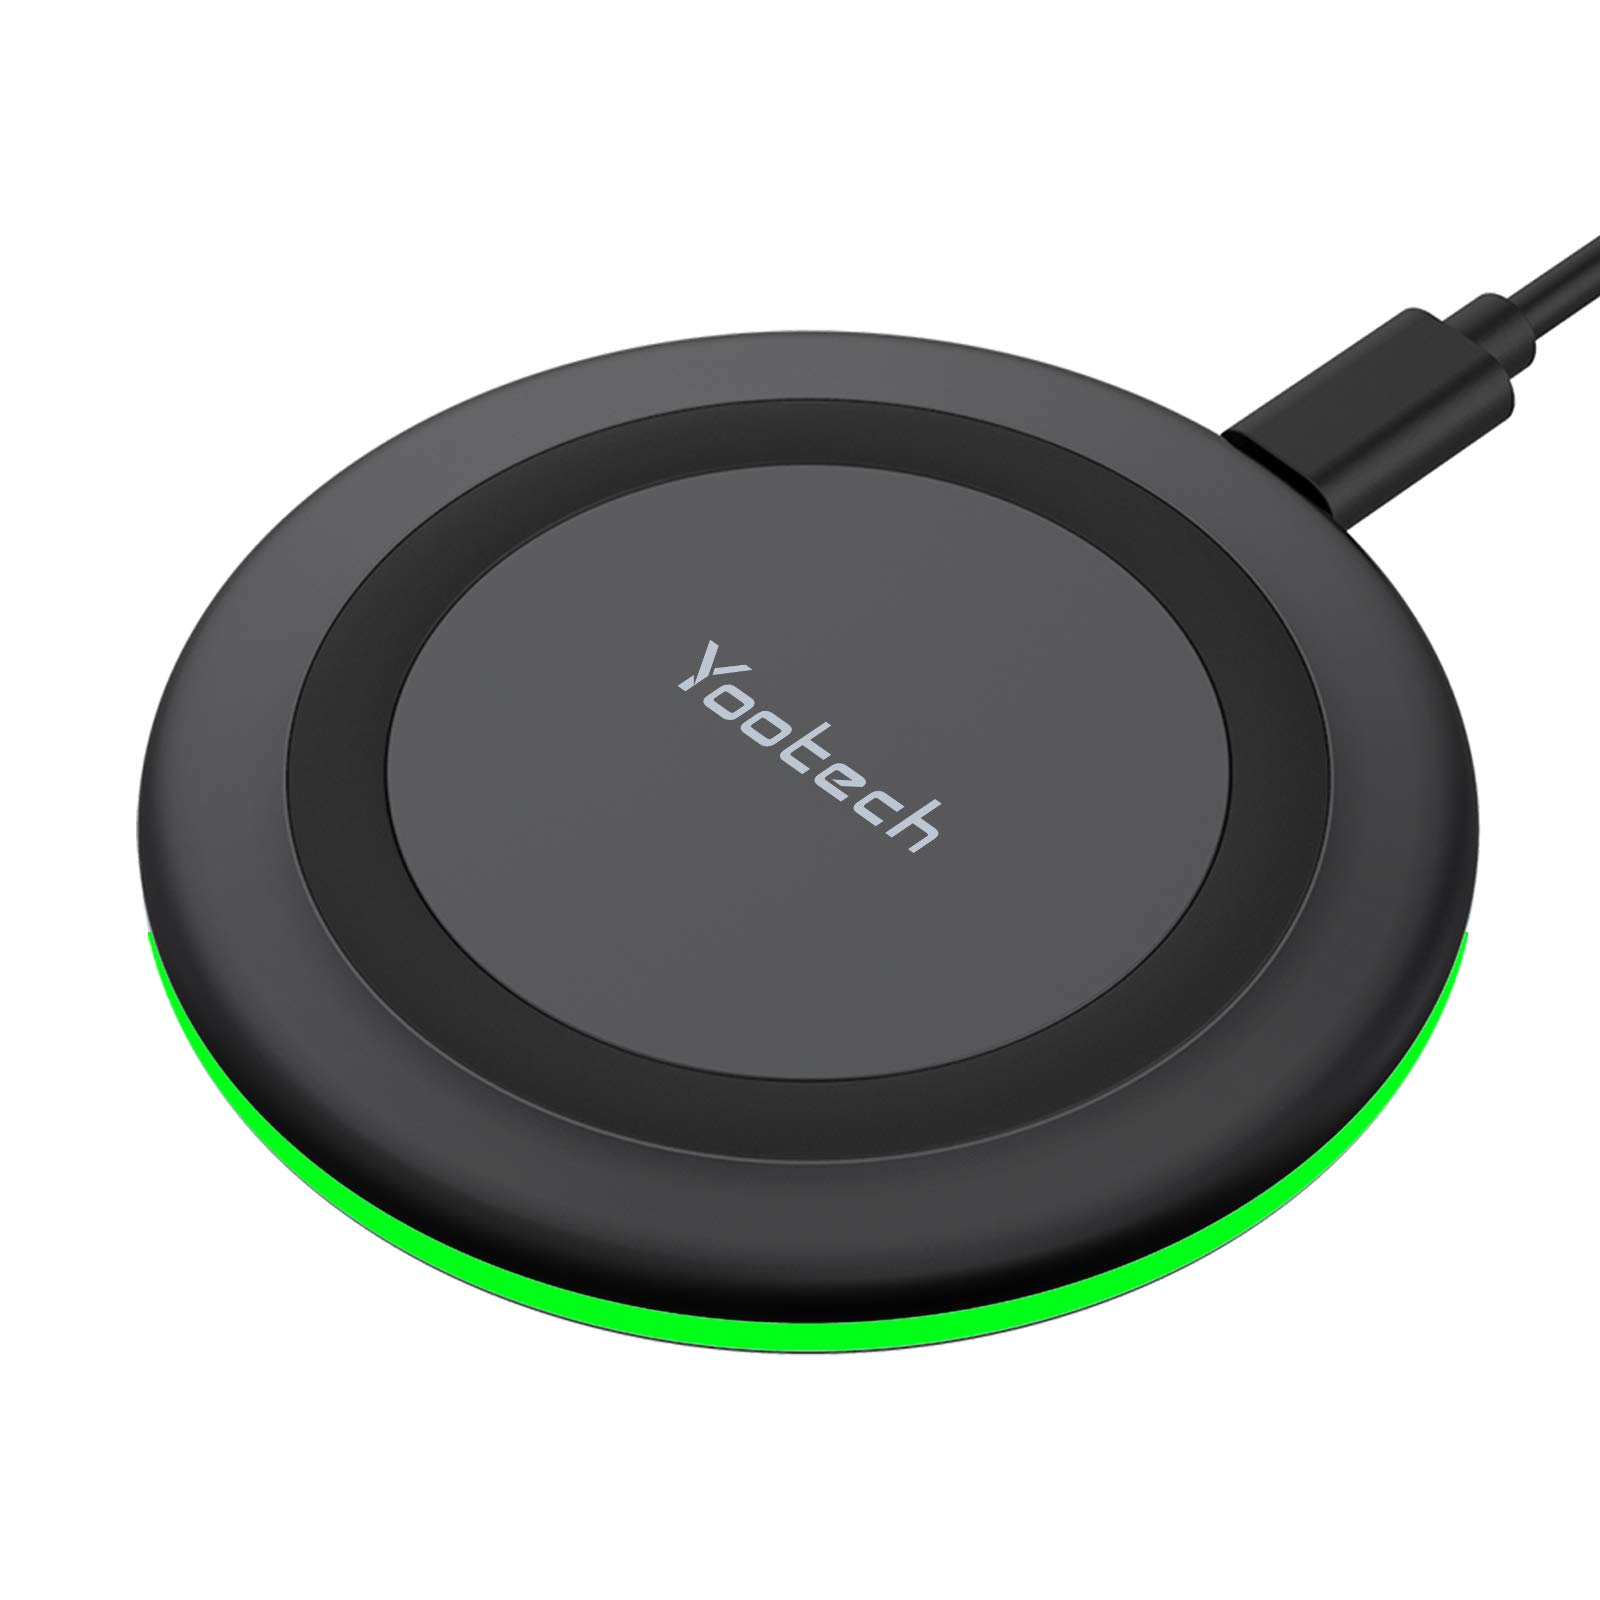 Book Cover Yootech Wireless Charger,10W Max Fast Wireless Charging Pad Compatible with iPhone 14/14 Plus/14 Pro/14 Pro Max/13/13 Mini/SE 2022/12/11/X/8,Samsung Galaxy S22/S21/S20,AirPods Pro 2(No AC Adapter) Black/Black